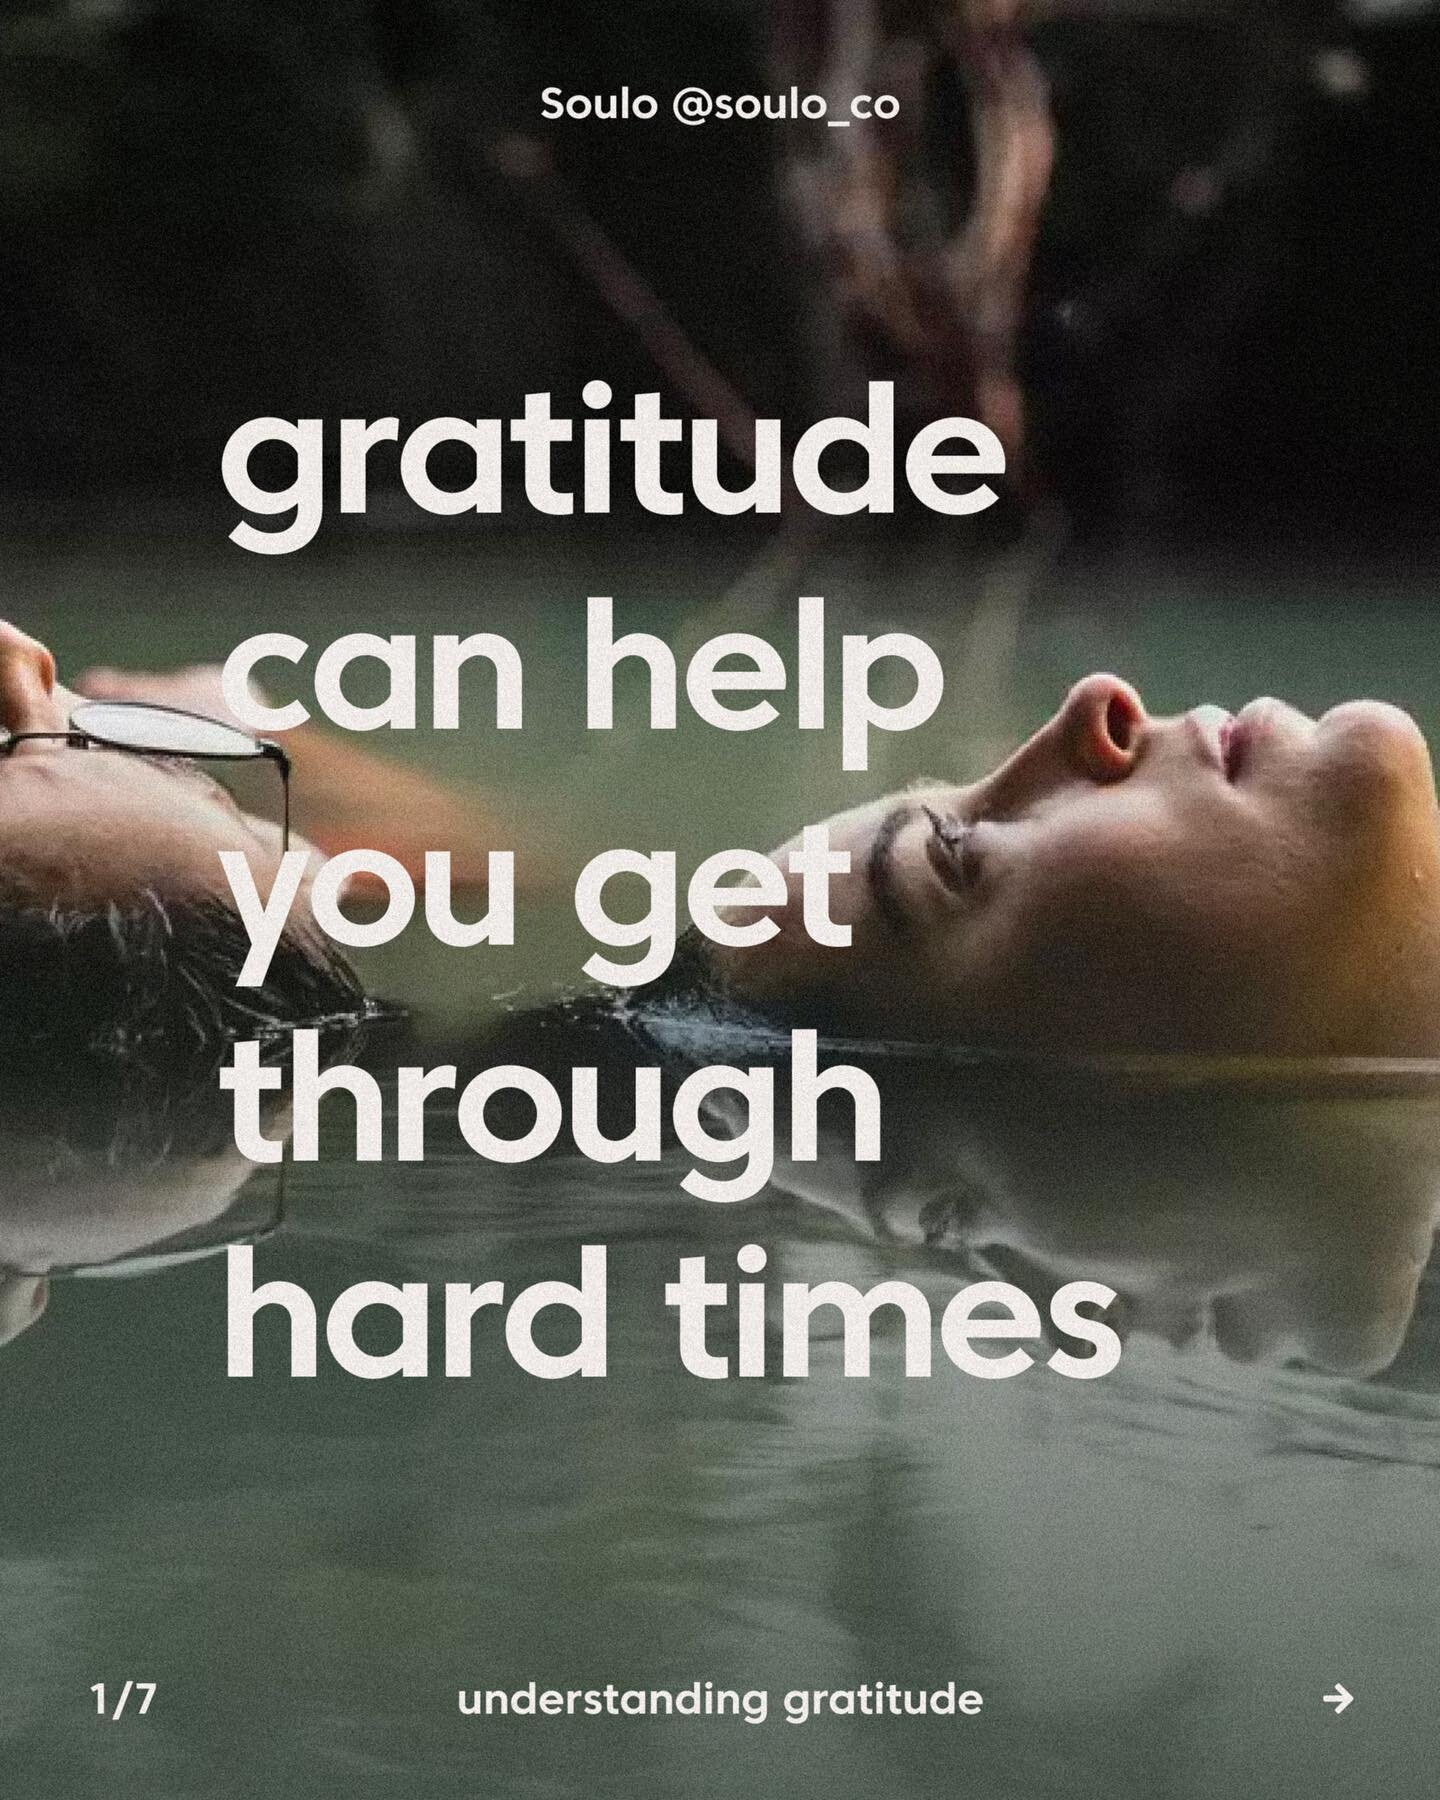 Let&rsquo;s talk about the power of gratitude. When you turn this into a daily practice, it can have the power to transform your life. Swipe through to unlock the magic! ✨🙏

#Gratitude #Thankful #Blessed #GratefulHeart #AppreciationPost #PositiveVib